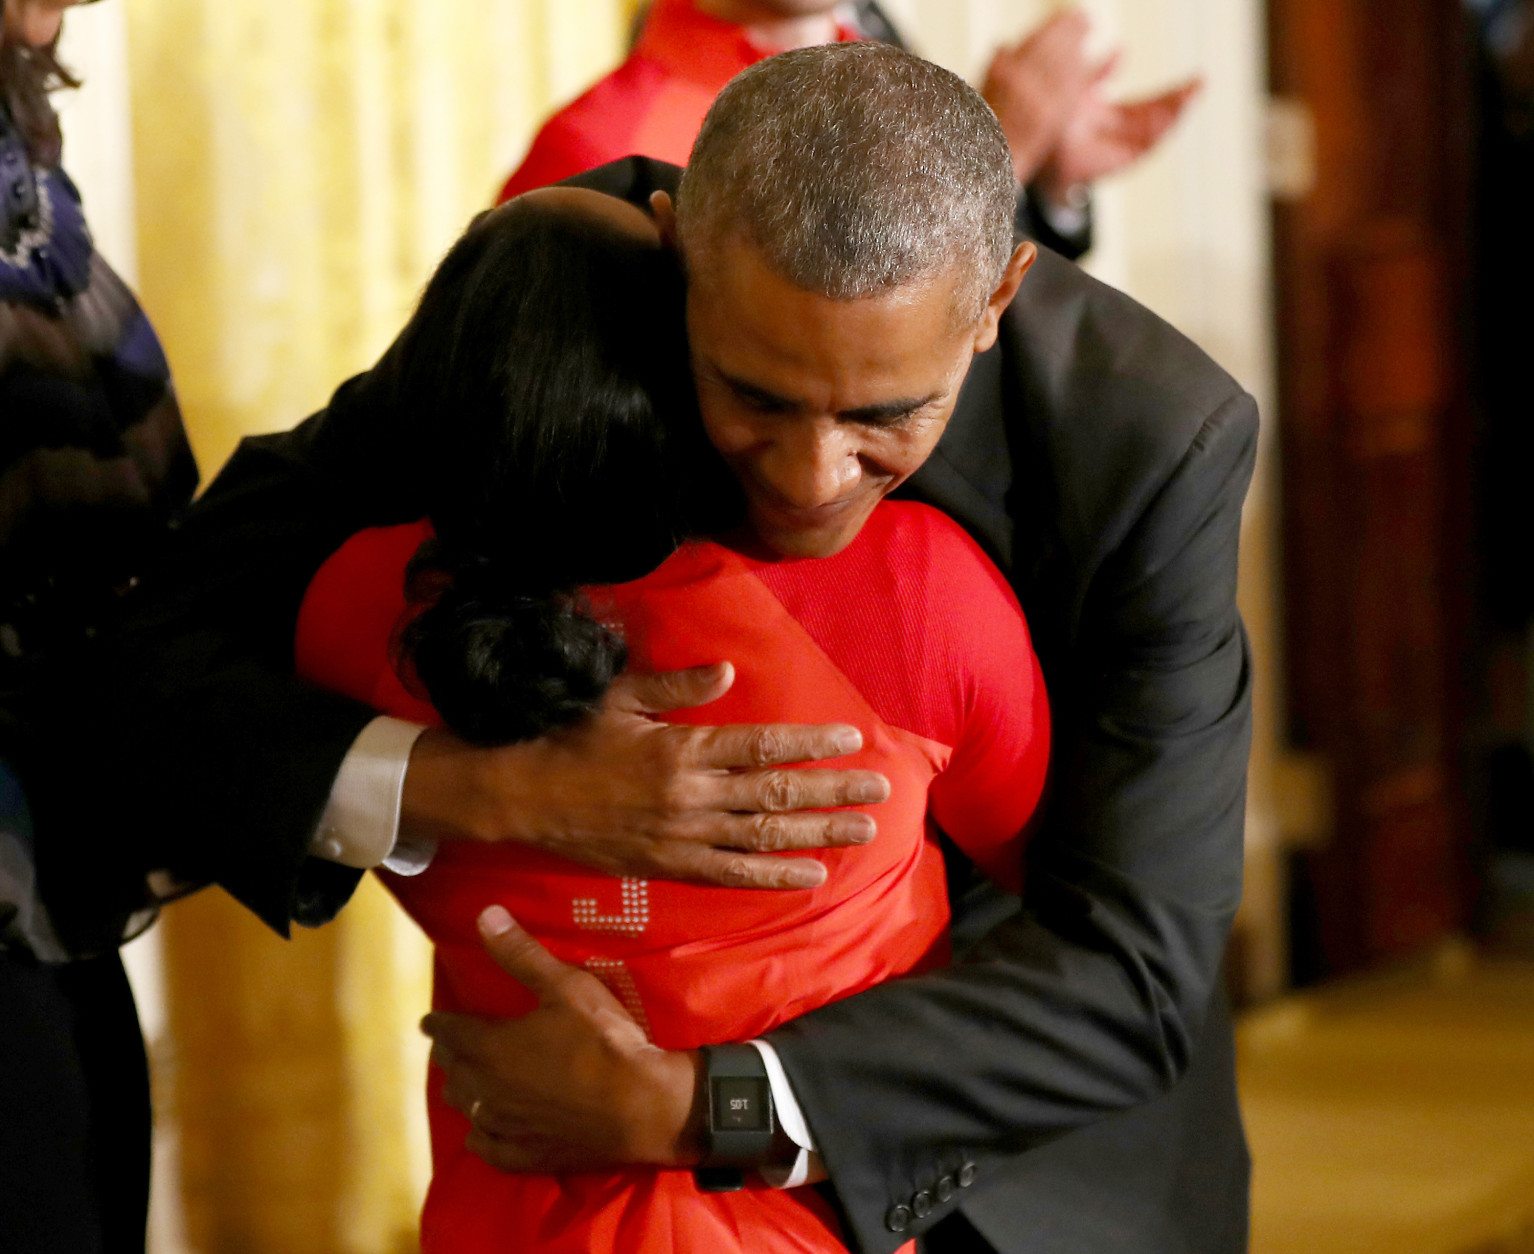 WASHINGTON, DC - SEPTEMBER 29:  U.S. President Barack Obama hugs Olympian Simone Biles during an East Room event at the White House September 29, 2016 in Washington, DC. President Obama and first lady Michelle Obama welcome the 2016 U.S. Olympic and Paralympic teams to the White House to honor their participation and success in the Rio Olympic Games this year.  (Photo by Elsa/Getty Images)